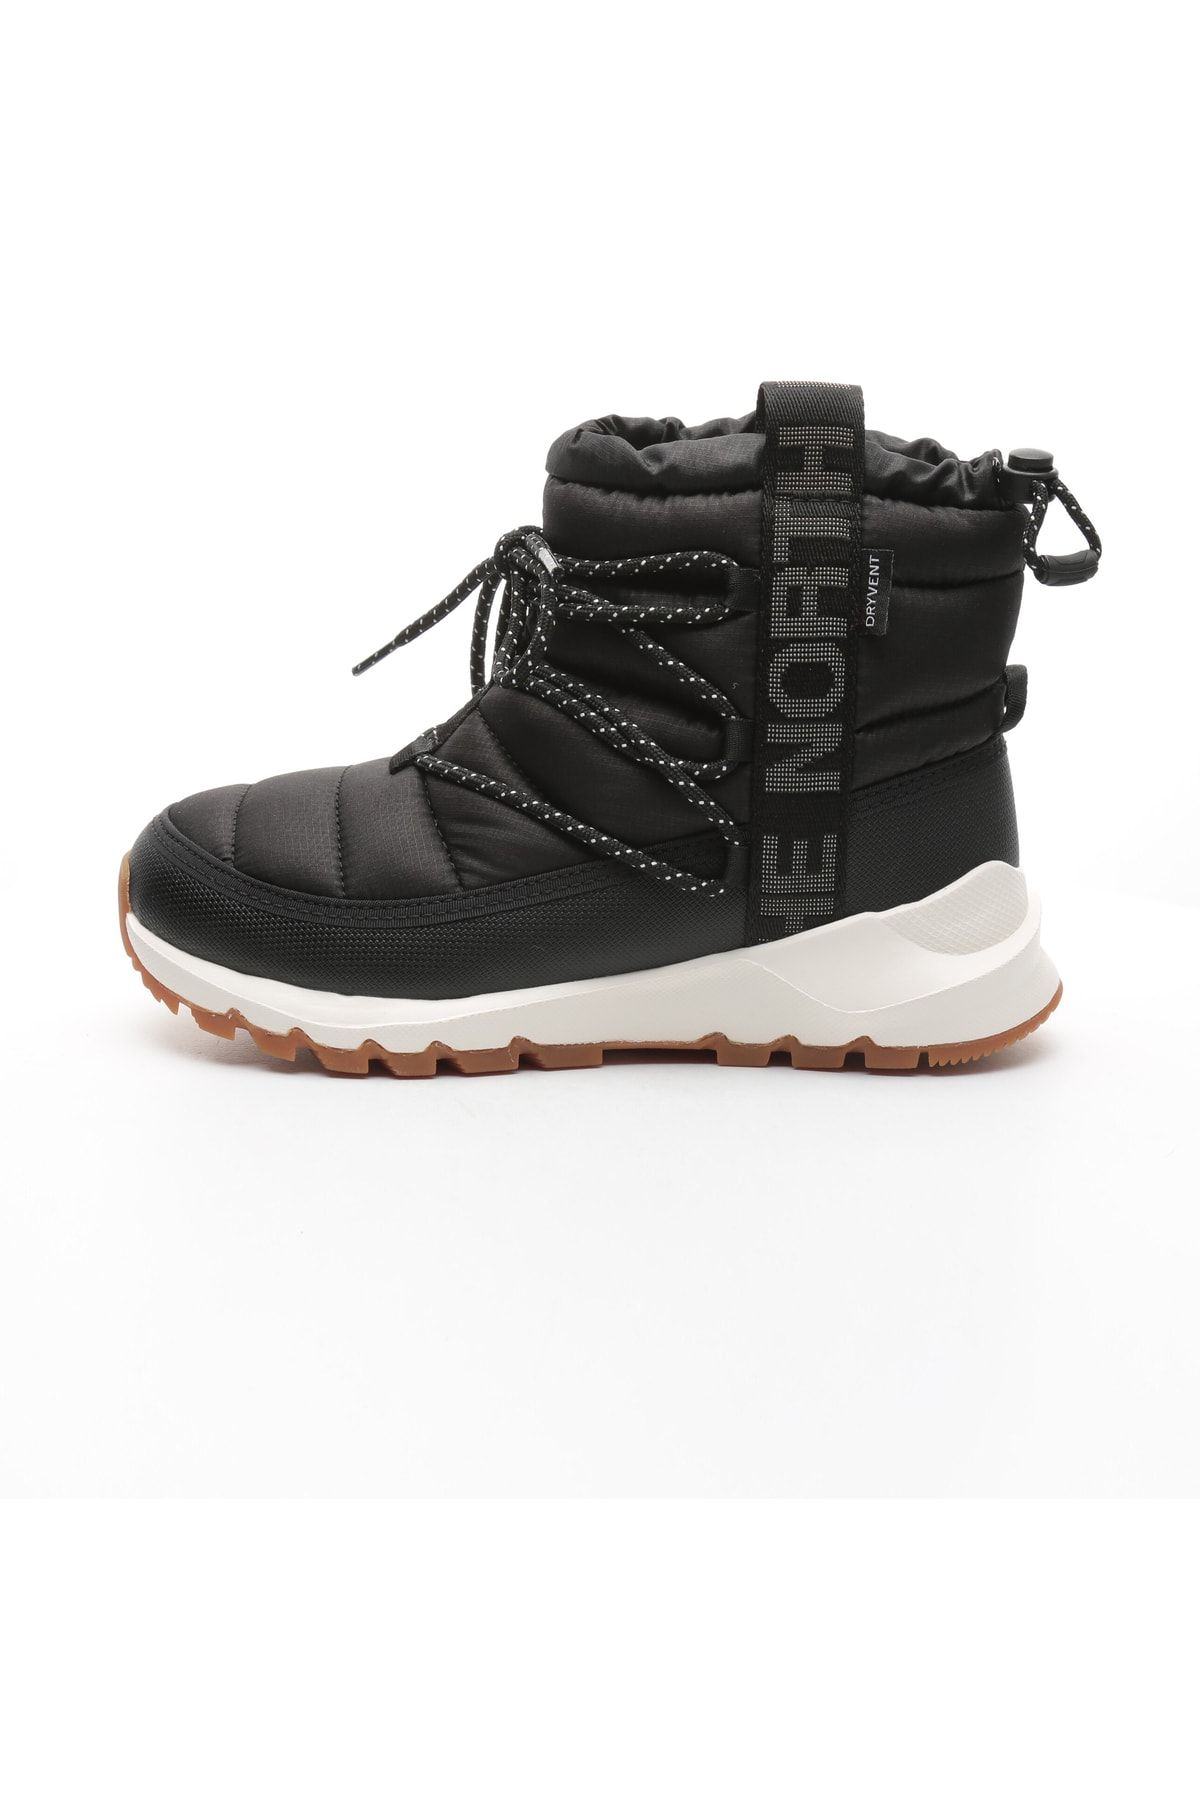 The North Face F0a5lwdr0g1-r W Thermoball Lace Up Wp Kadın Bot